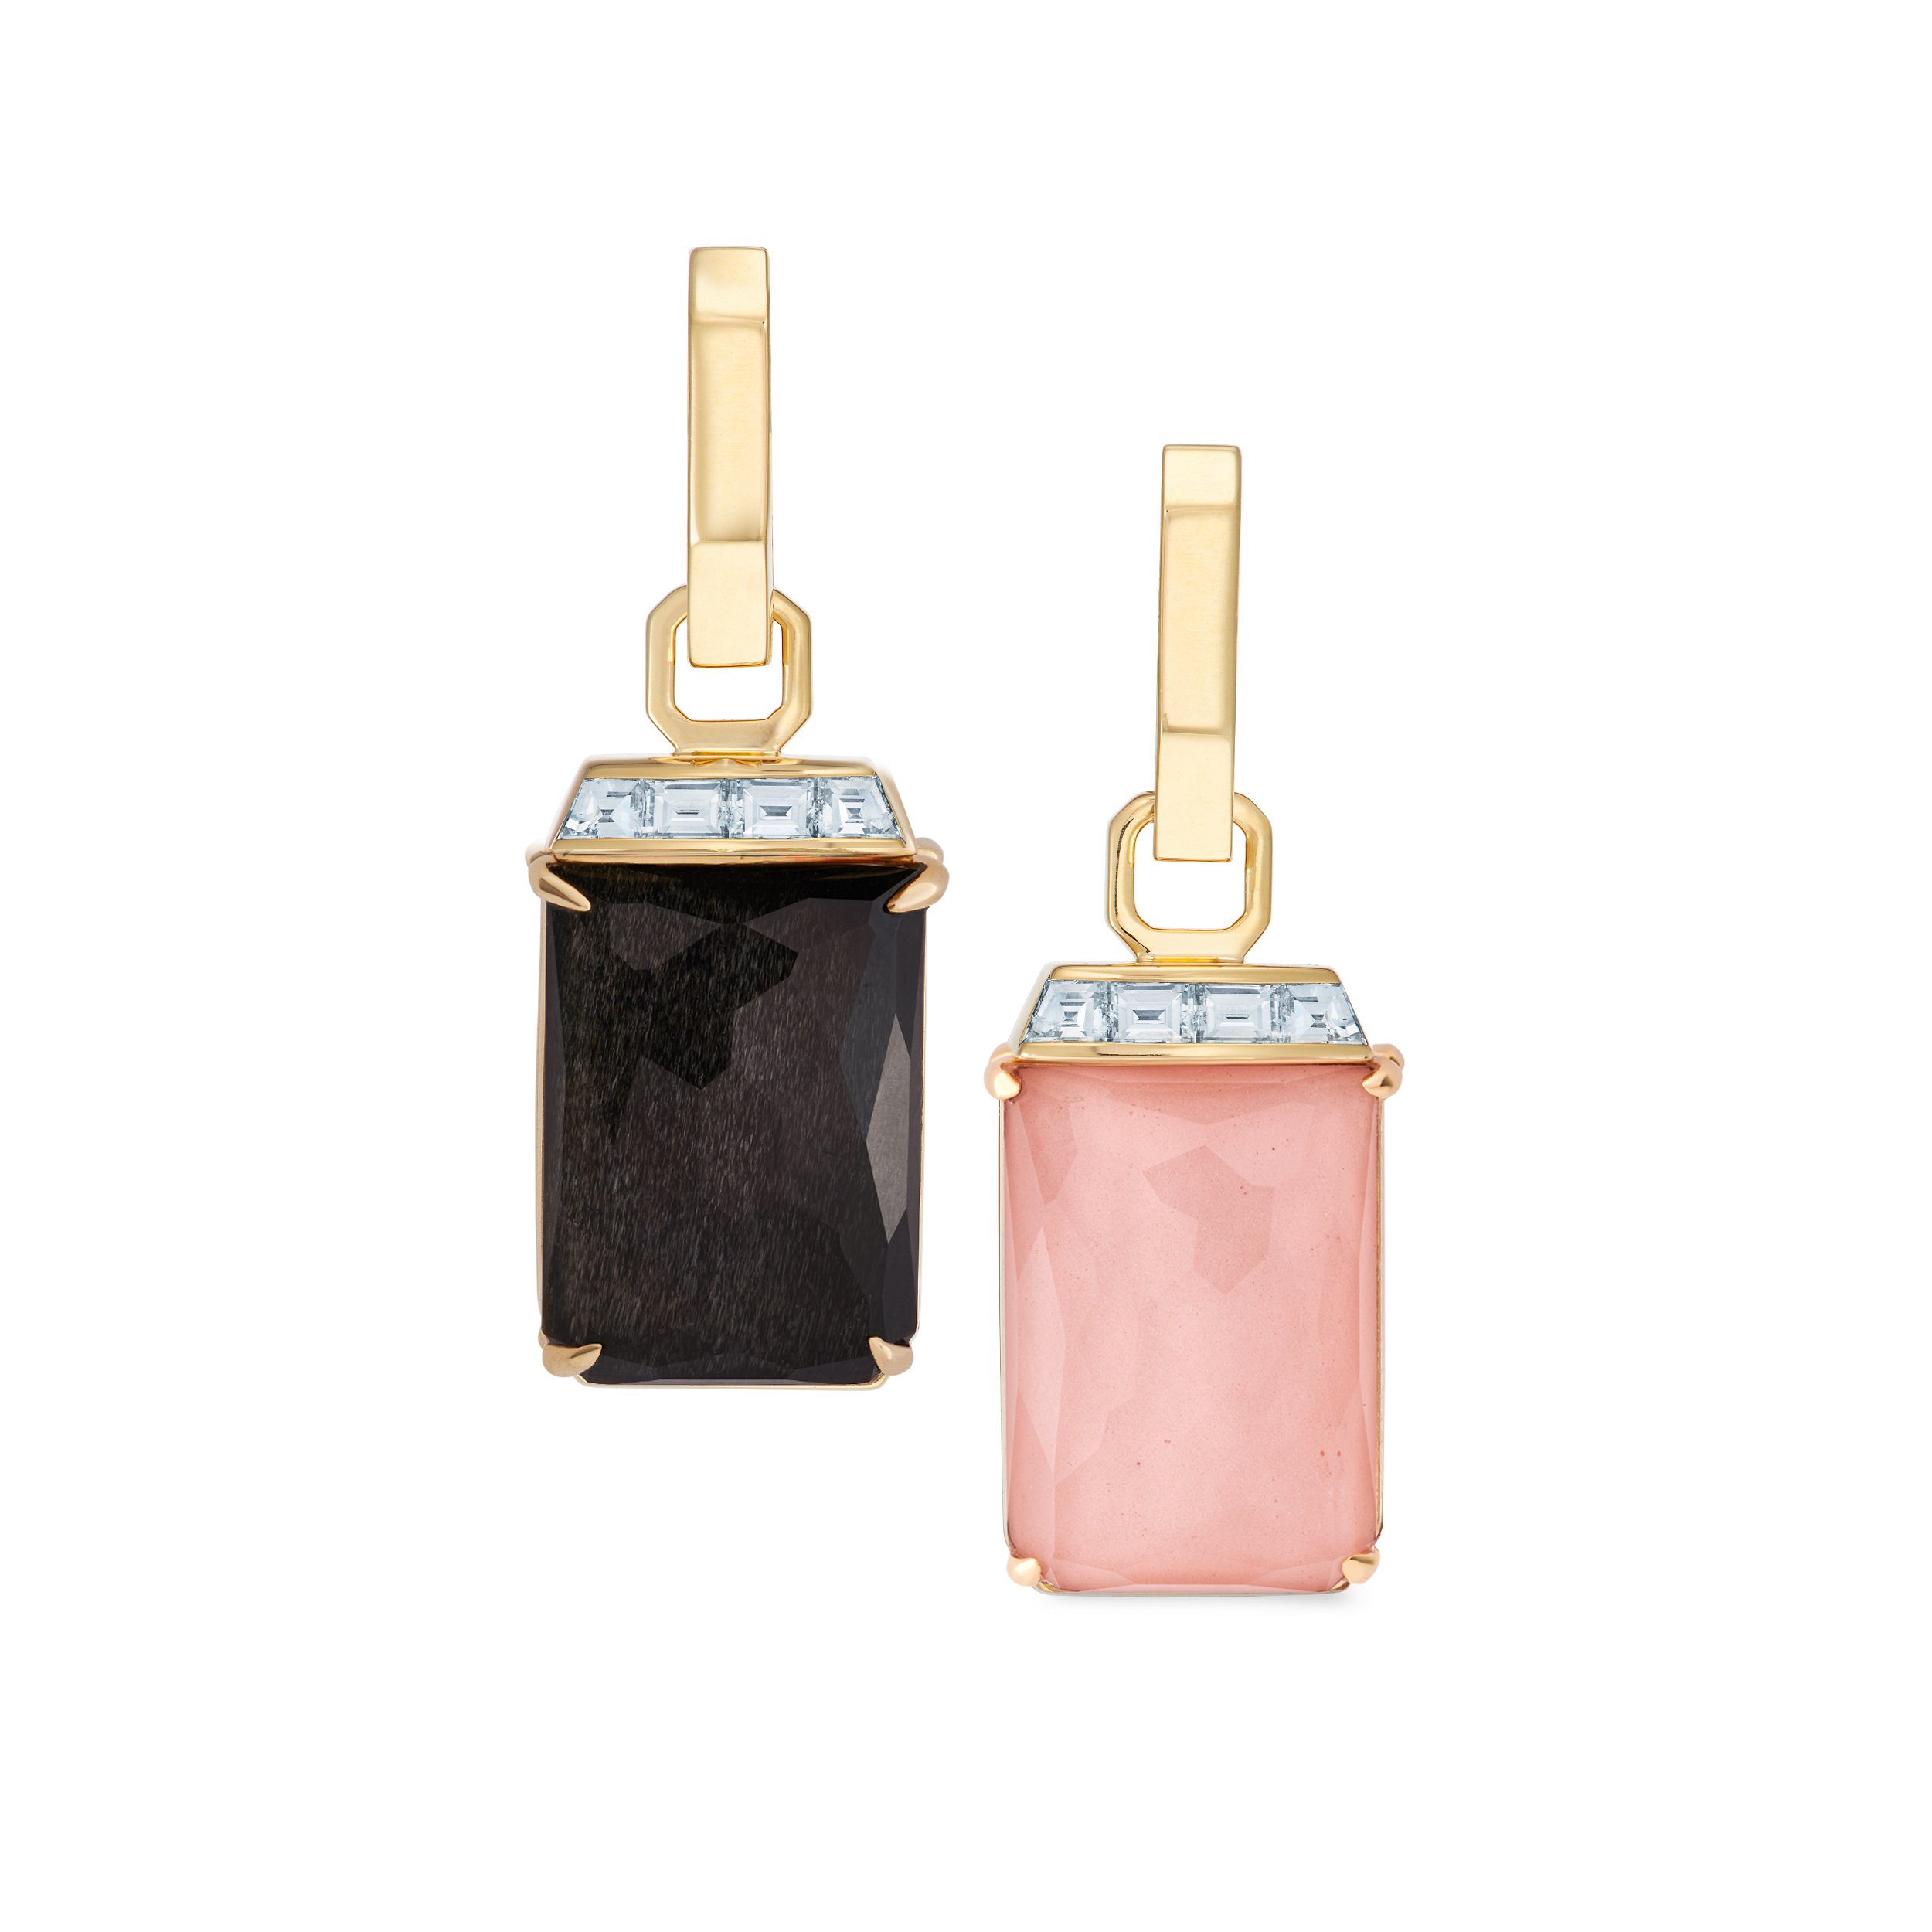 CH2 Tablet Twister Large Earrings with Silver Obsidian, Peach Quartz and White diamonds in 18kt Yellow Gold